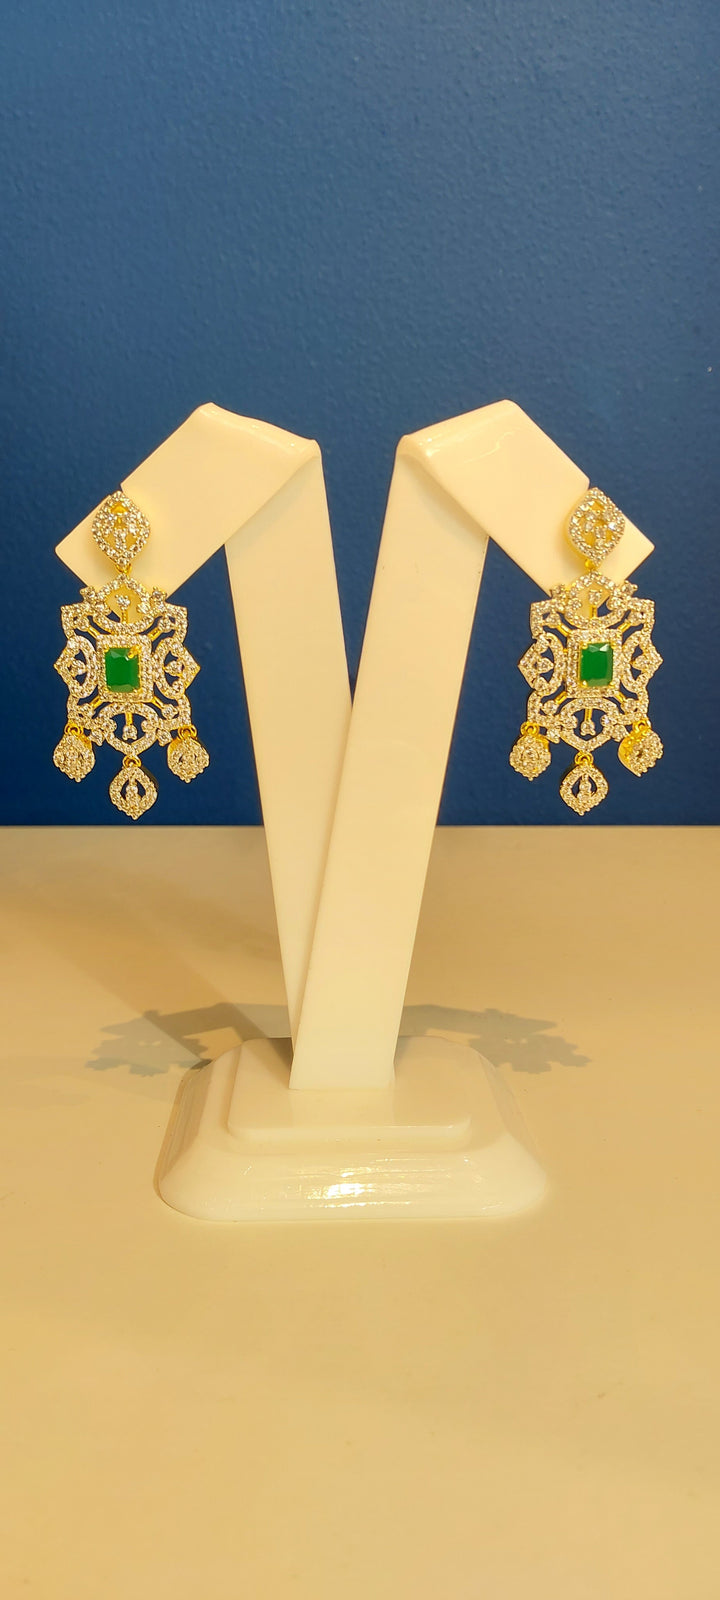 Riddhima Zircon Diamond, Gold and Emerald Destination Necklace and Earrings Set